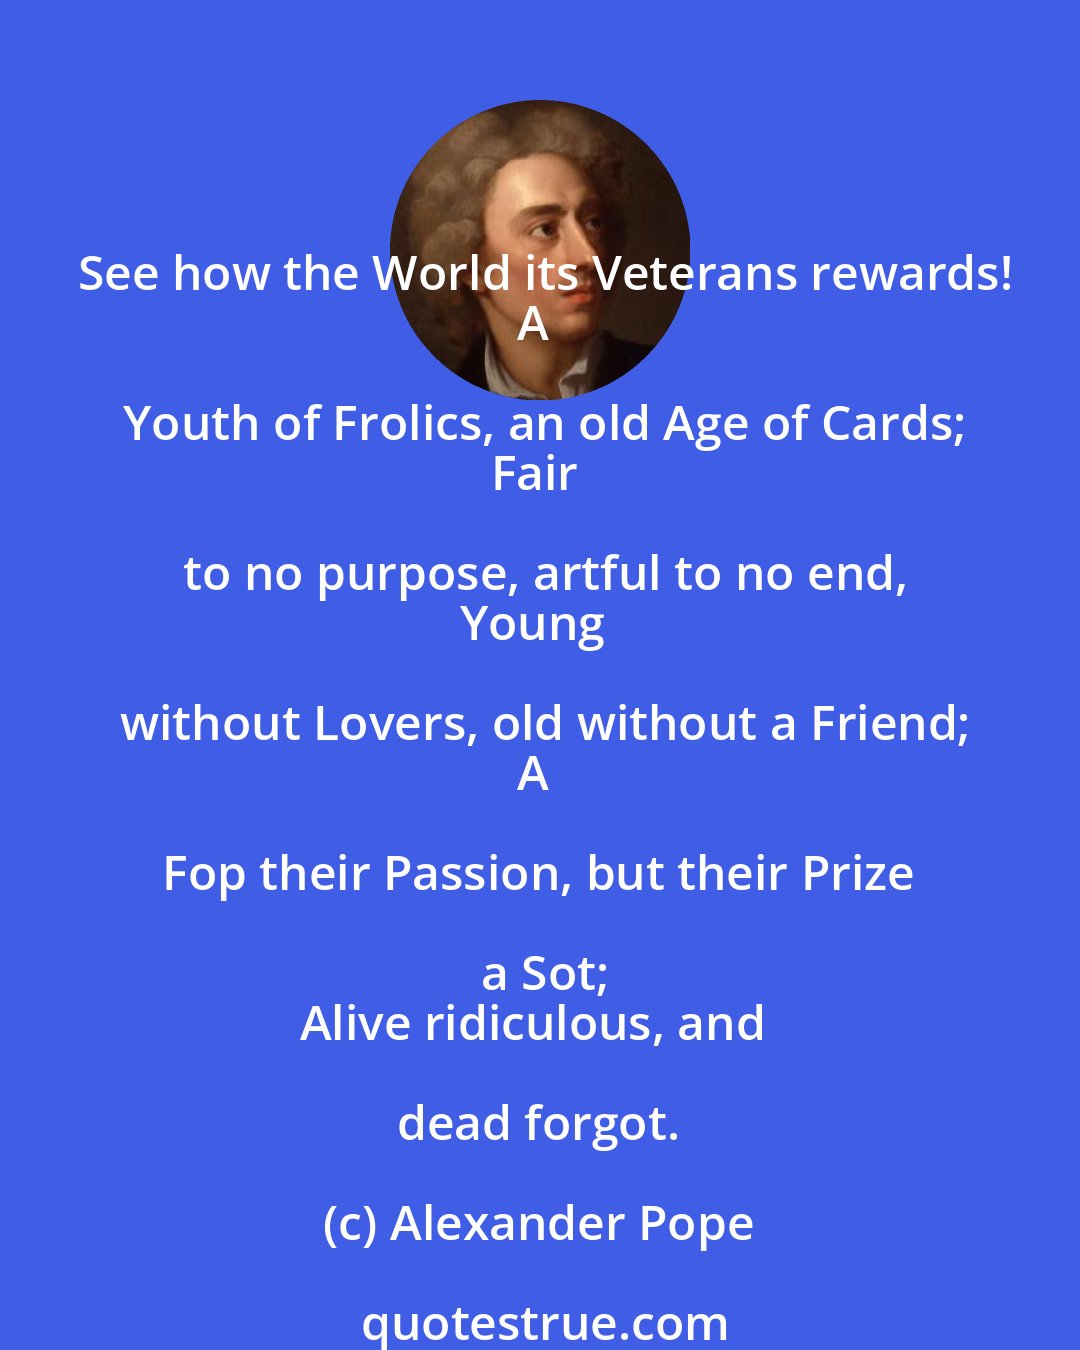 Alexander Pope: See how the World its Veterans rewards!
A Youth of Frolics, an old Age of Cards;
Fair to no purpose, artful to no end,
Young without Lovers, old without a Friend;
A Fop their Passion, but their Prize a Sot;
Alive ridiculous, and dead forgot.